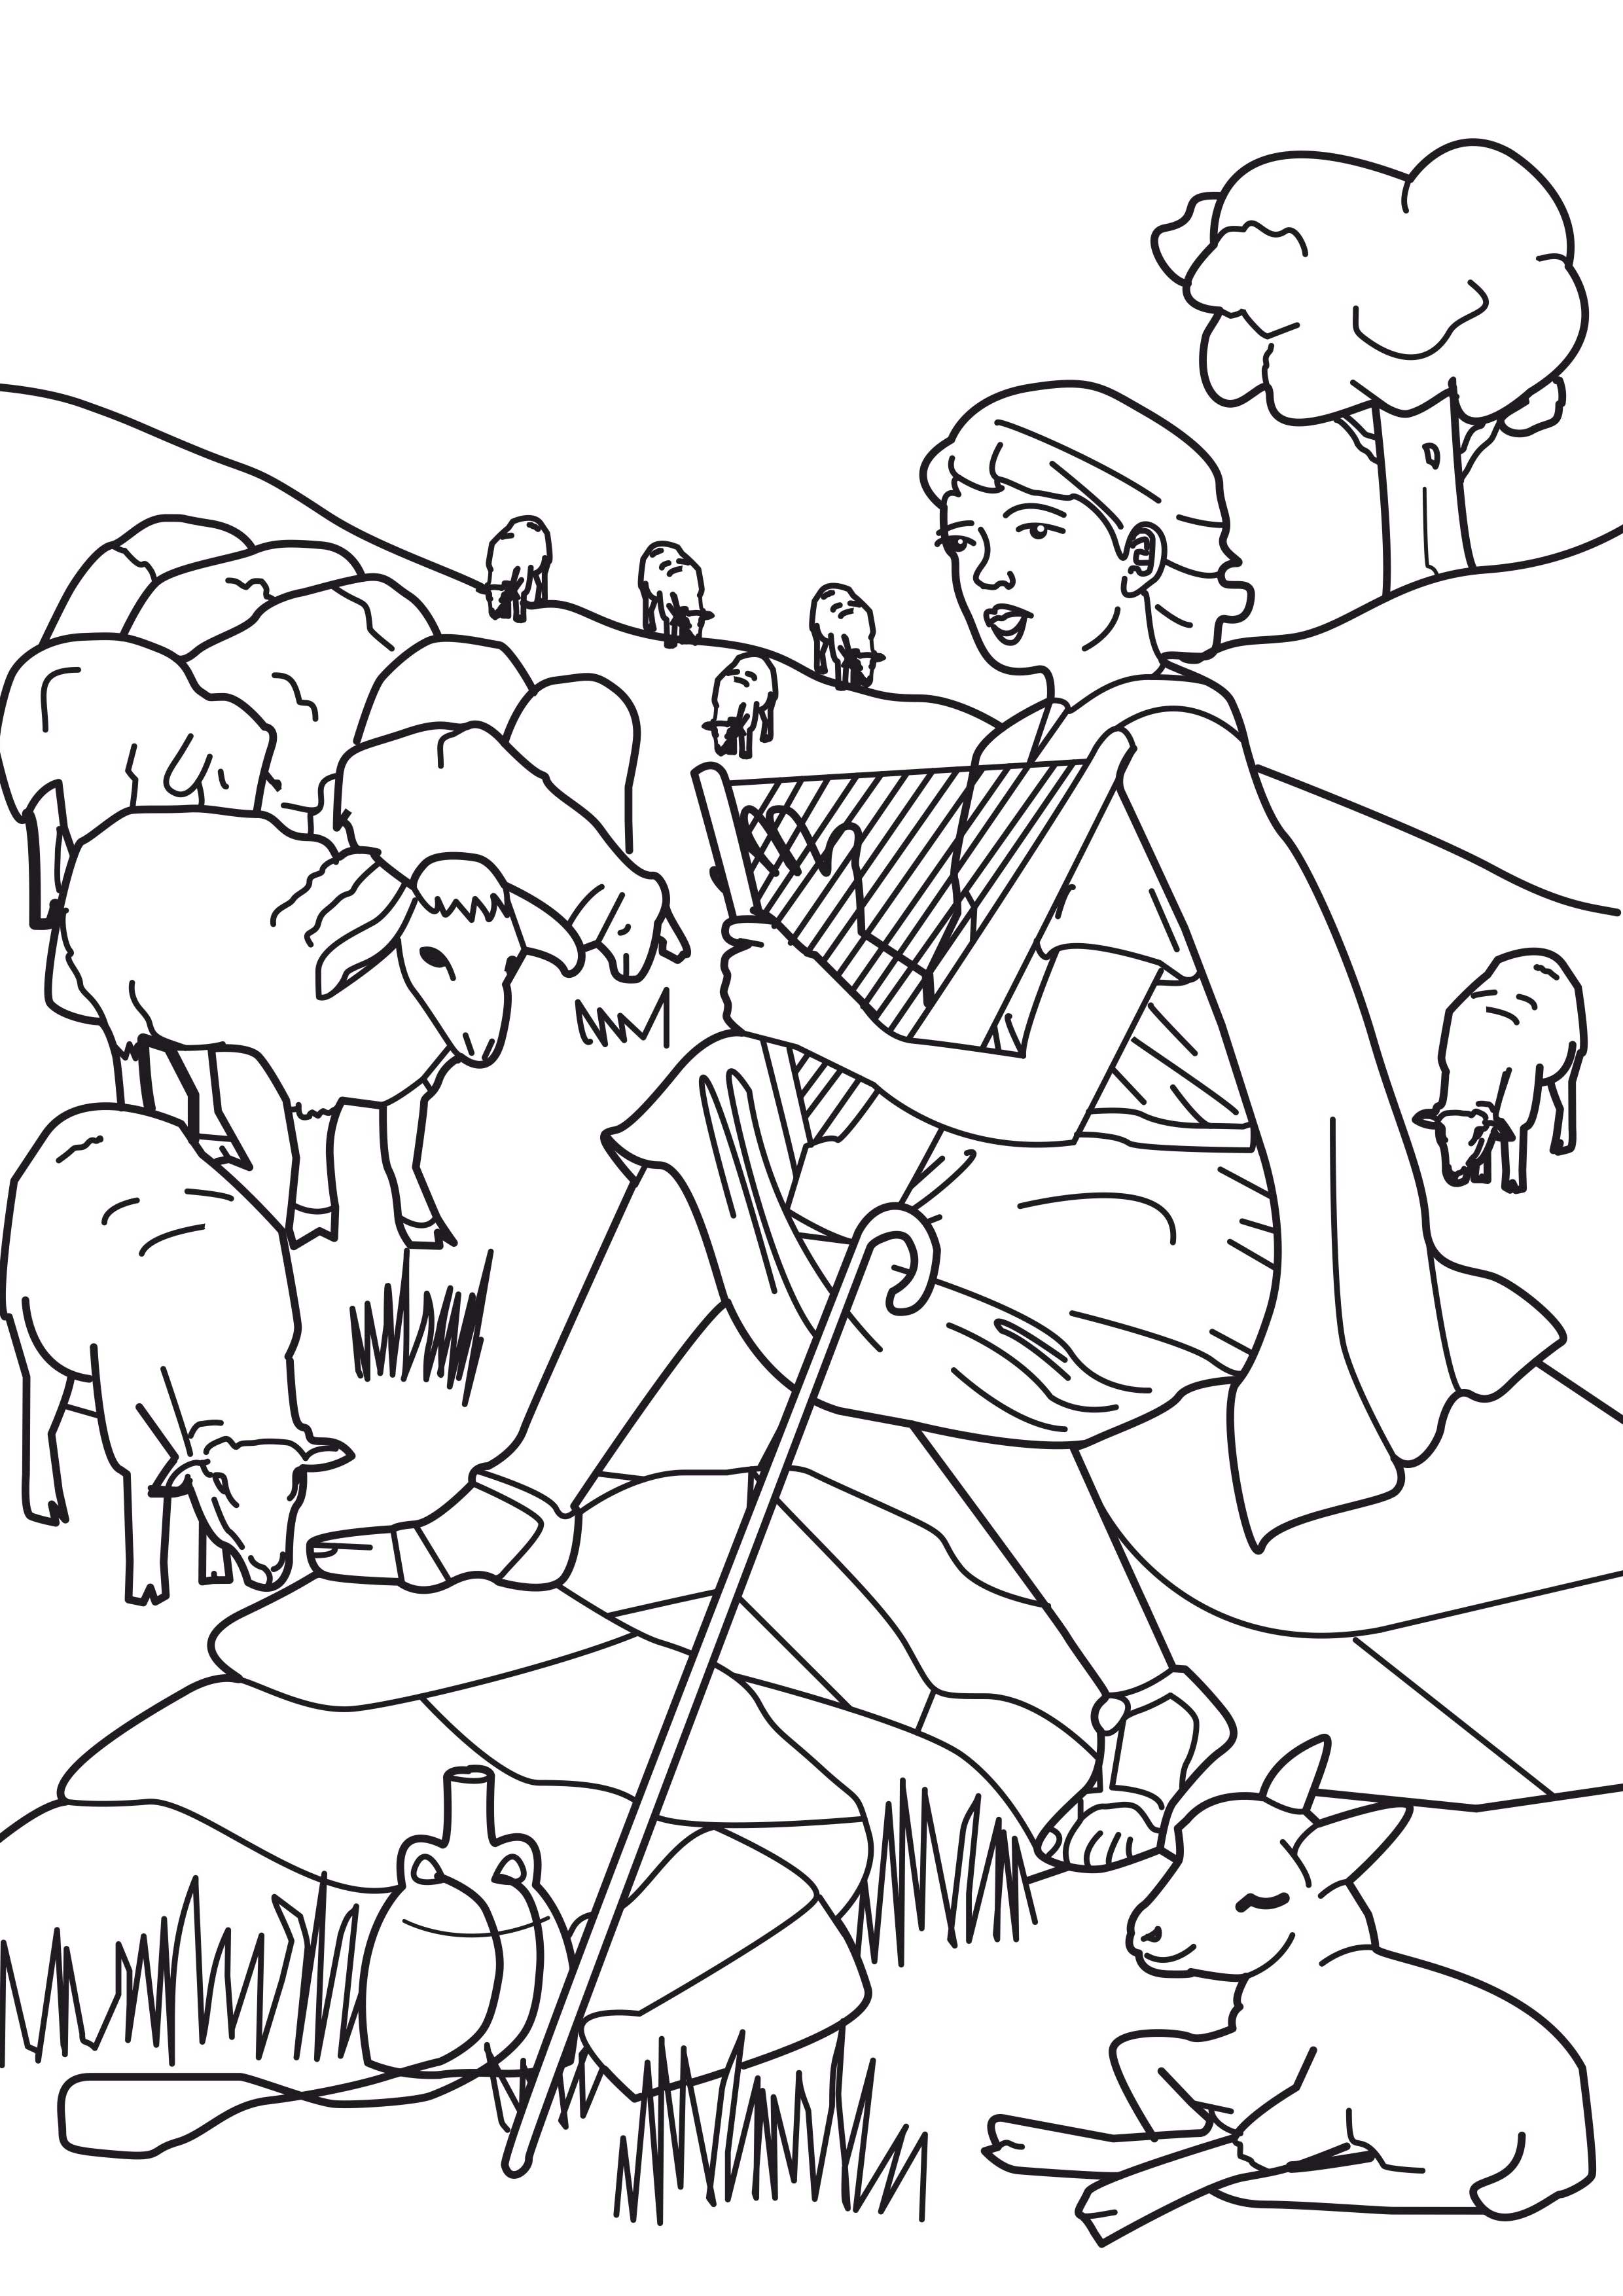 WP images: Coloring pages, post 12